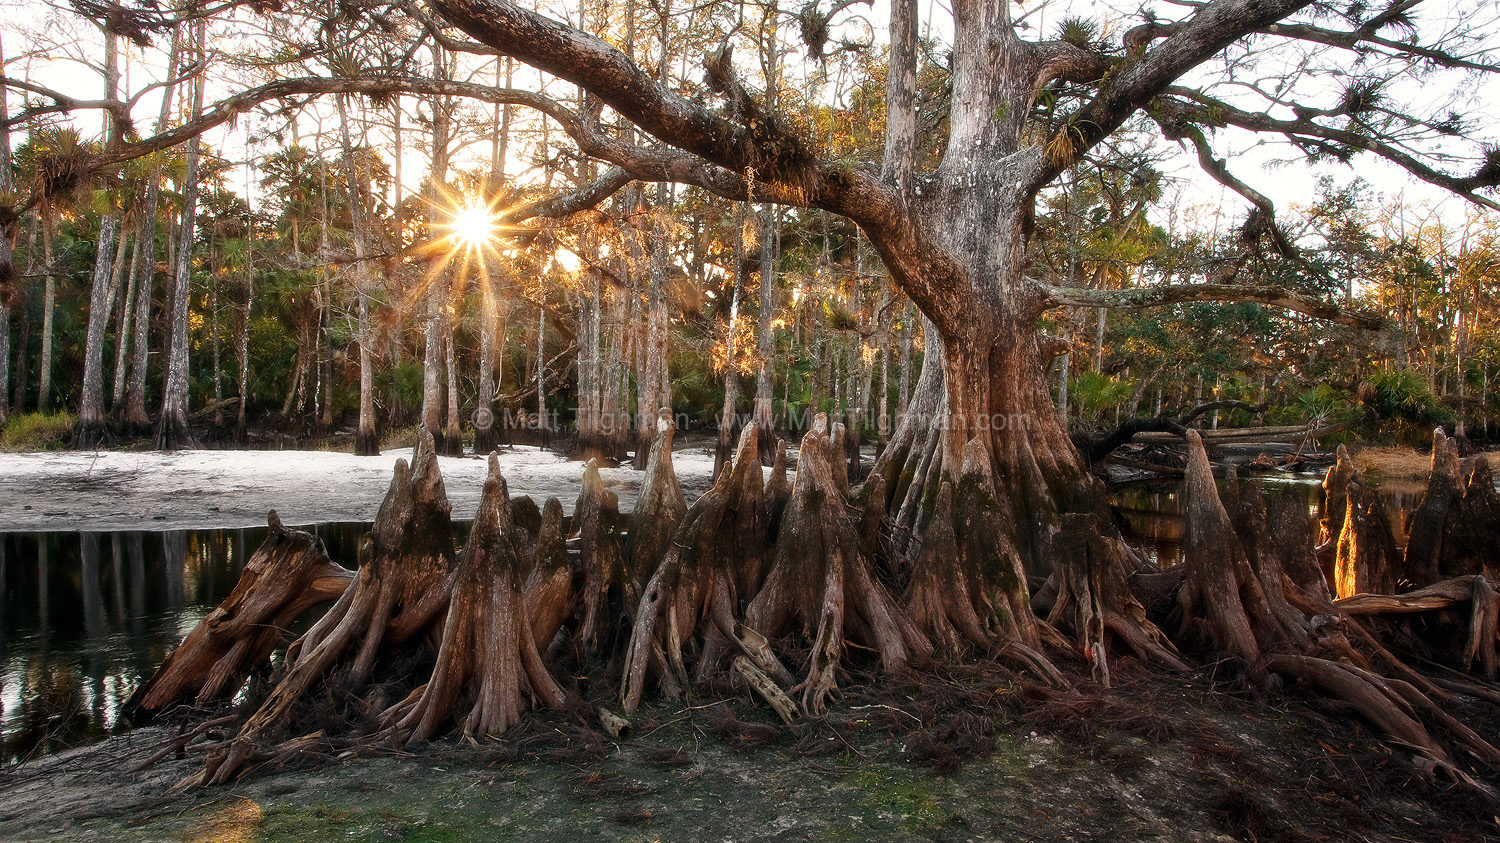 Fine art stock landscape photograph from the Florida cypress swamp along Fisheating Creek, showing the Memorial Tree at sunrise.